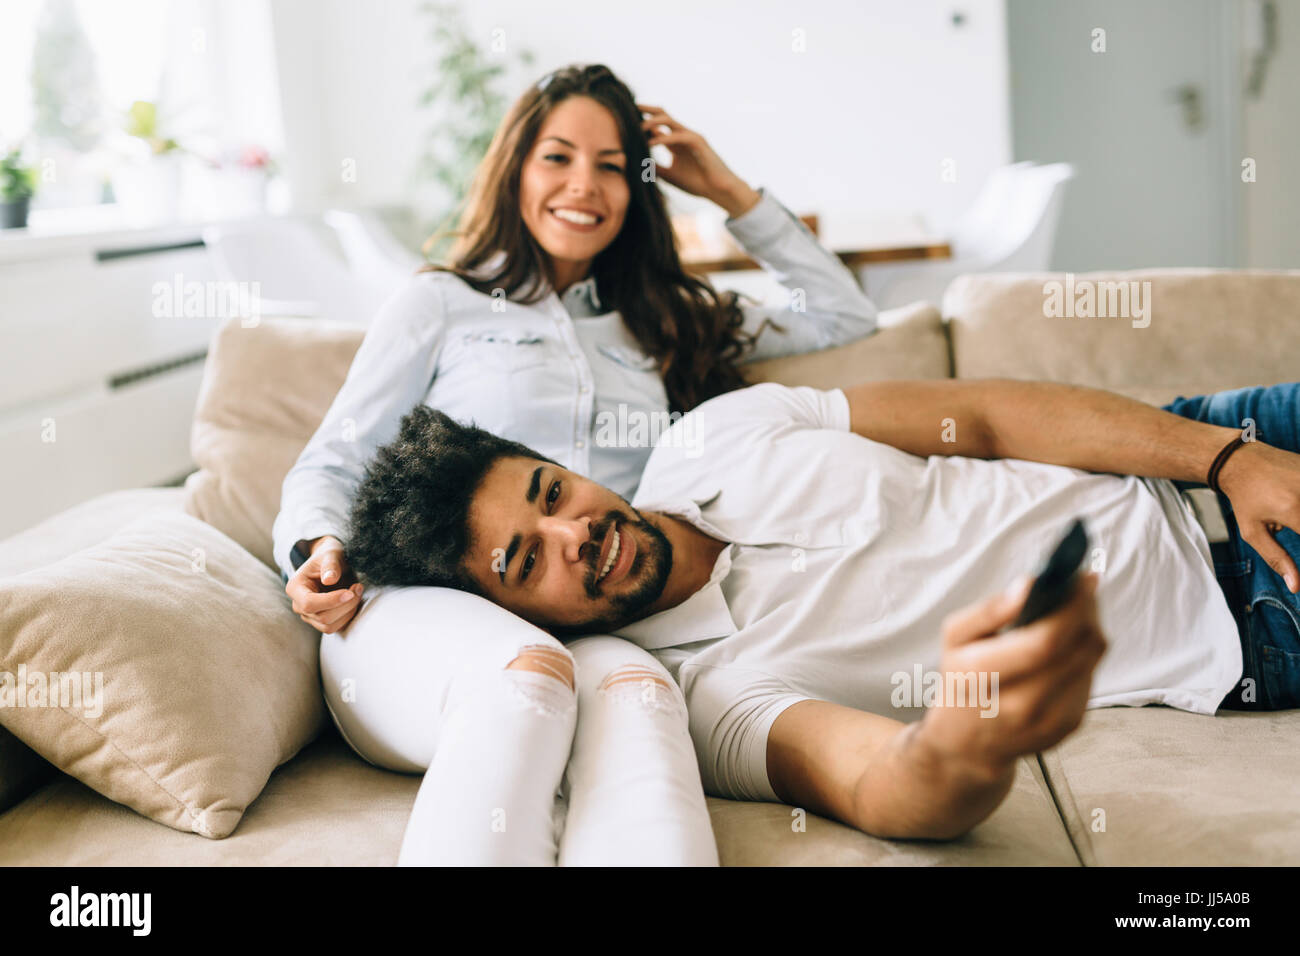 Picture of happy couple spending time together Stock Photo